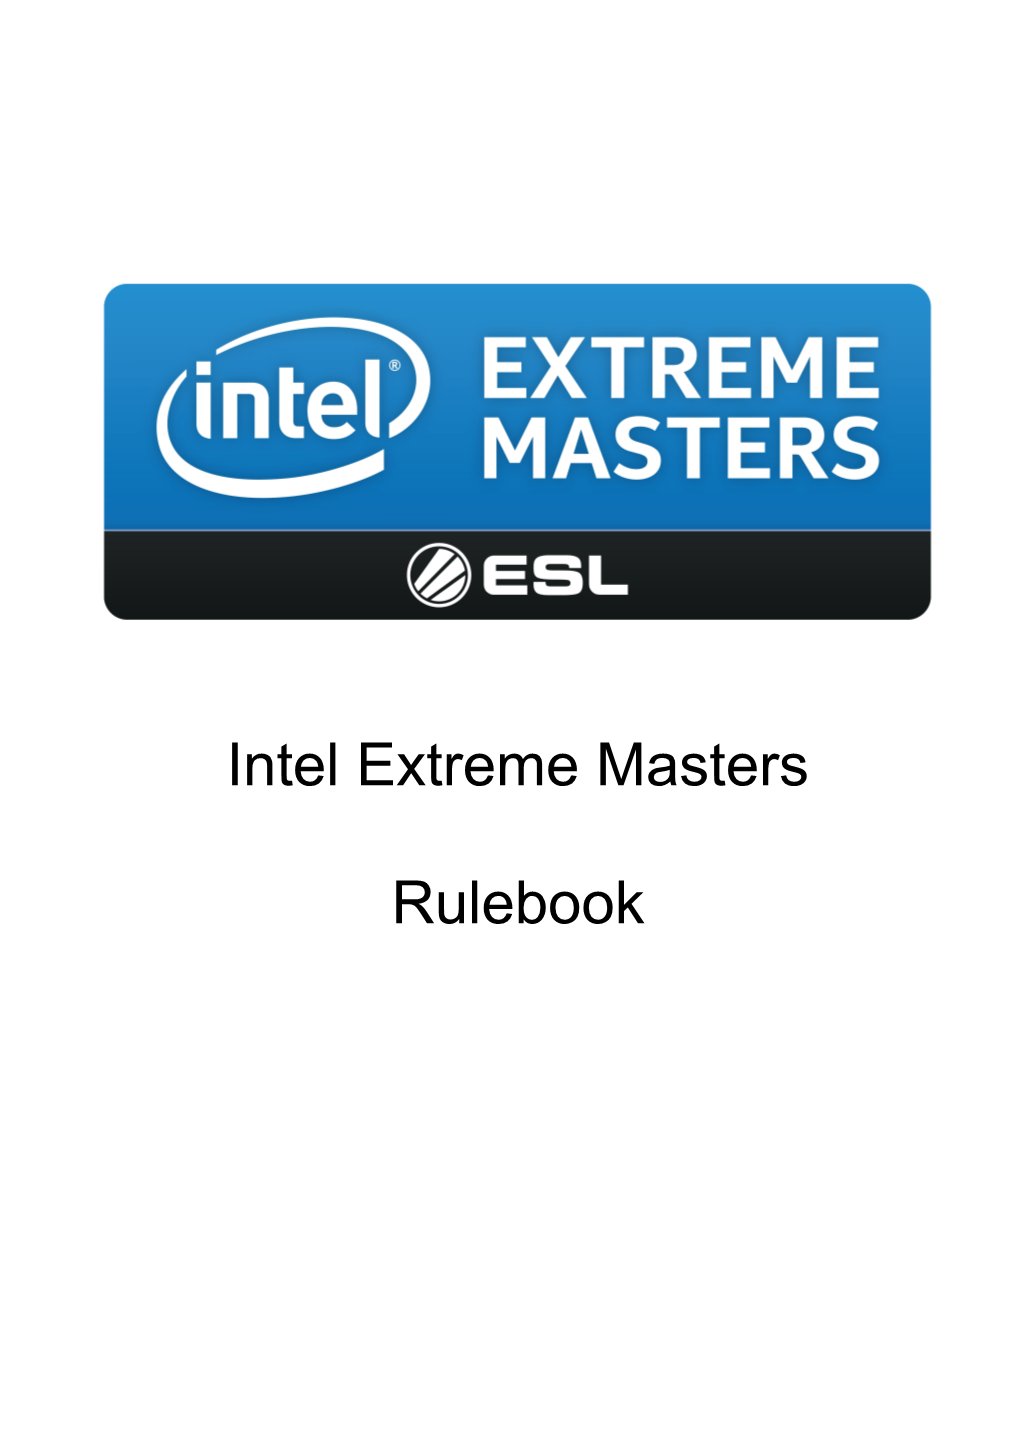 Intel Extreme Masters Rulebook Are Under No Circumstances Allowed